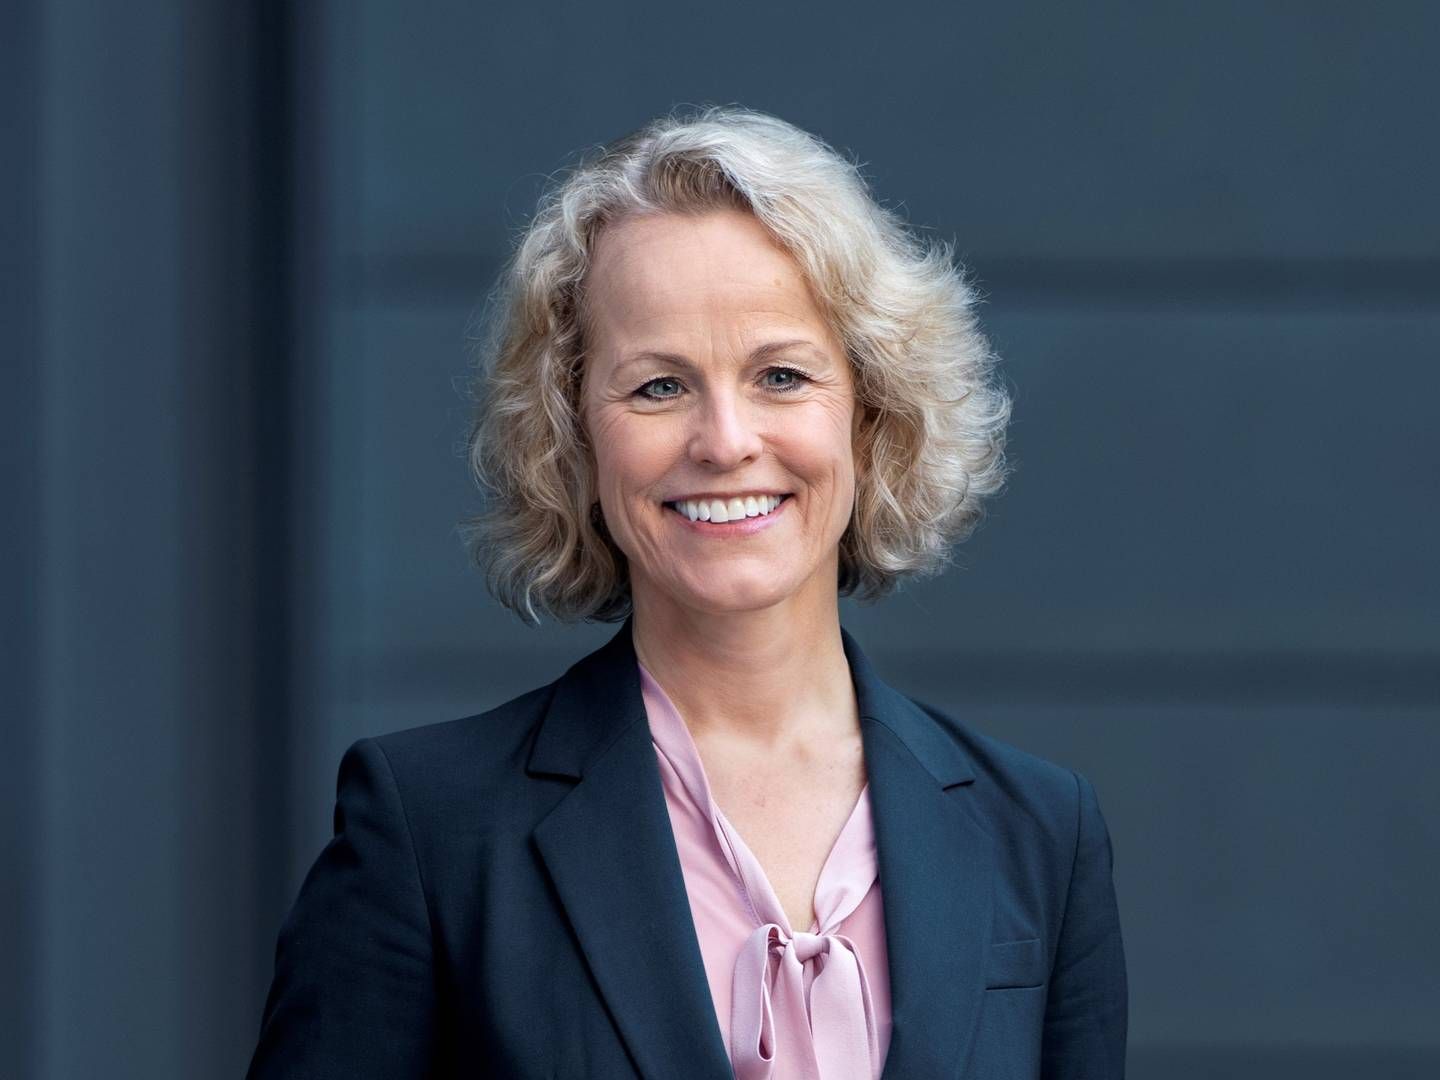 The move will "further enhance transparency," says Carine Smith Ihenacho, chief governance and compliance officer at Norges Bank Investment Management (NBIM), which manages Norway's Oil Fund. | Foto: PR / NBIM